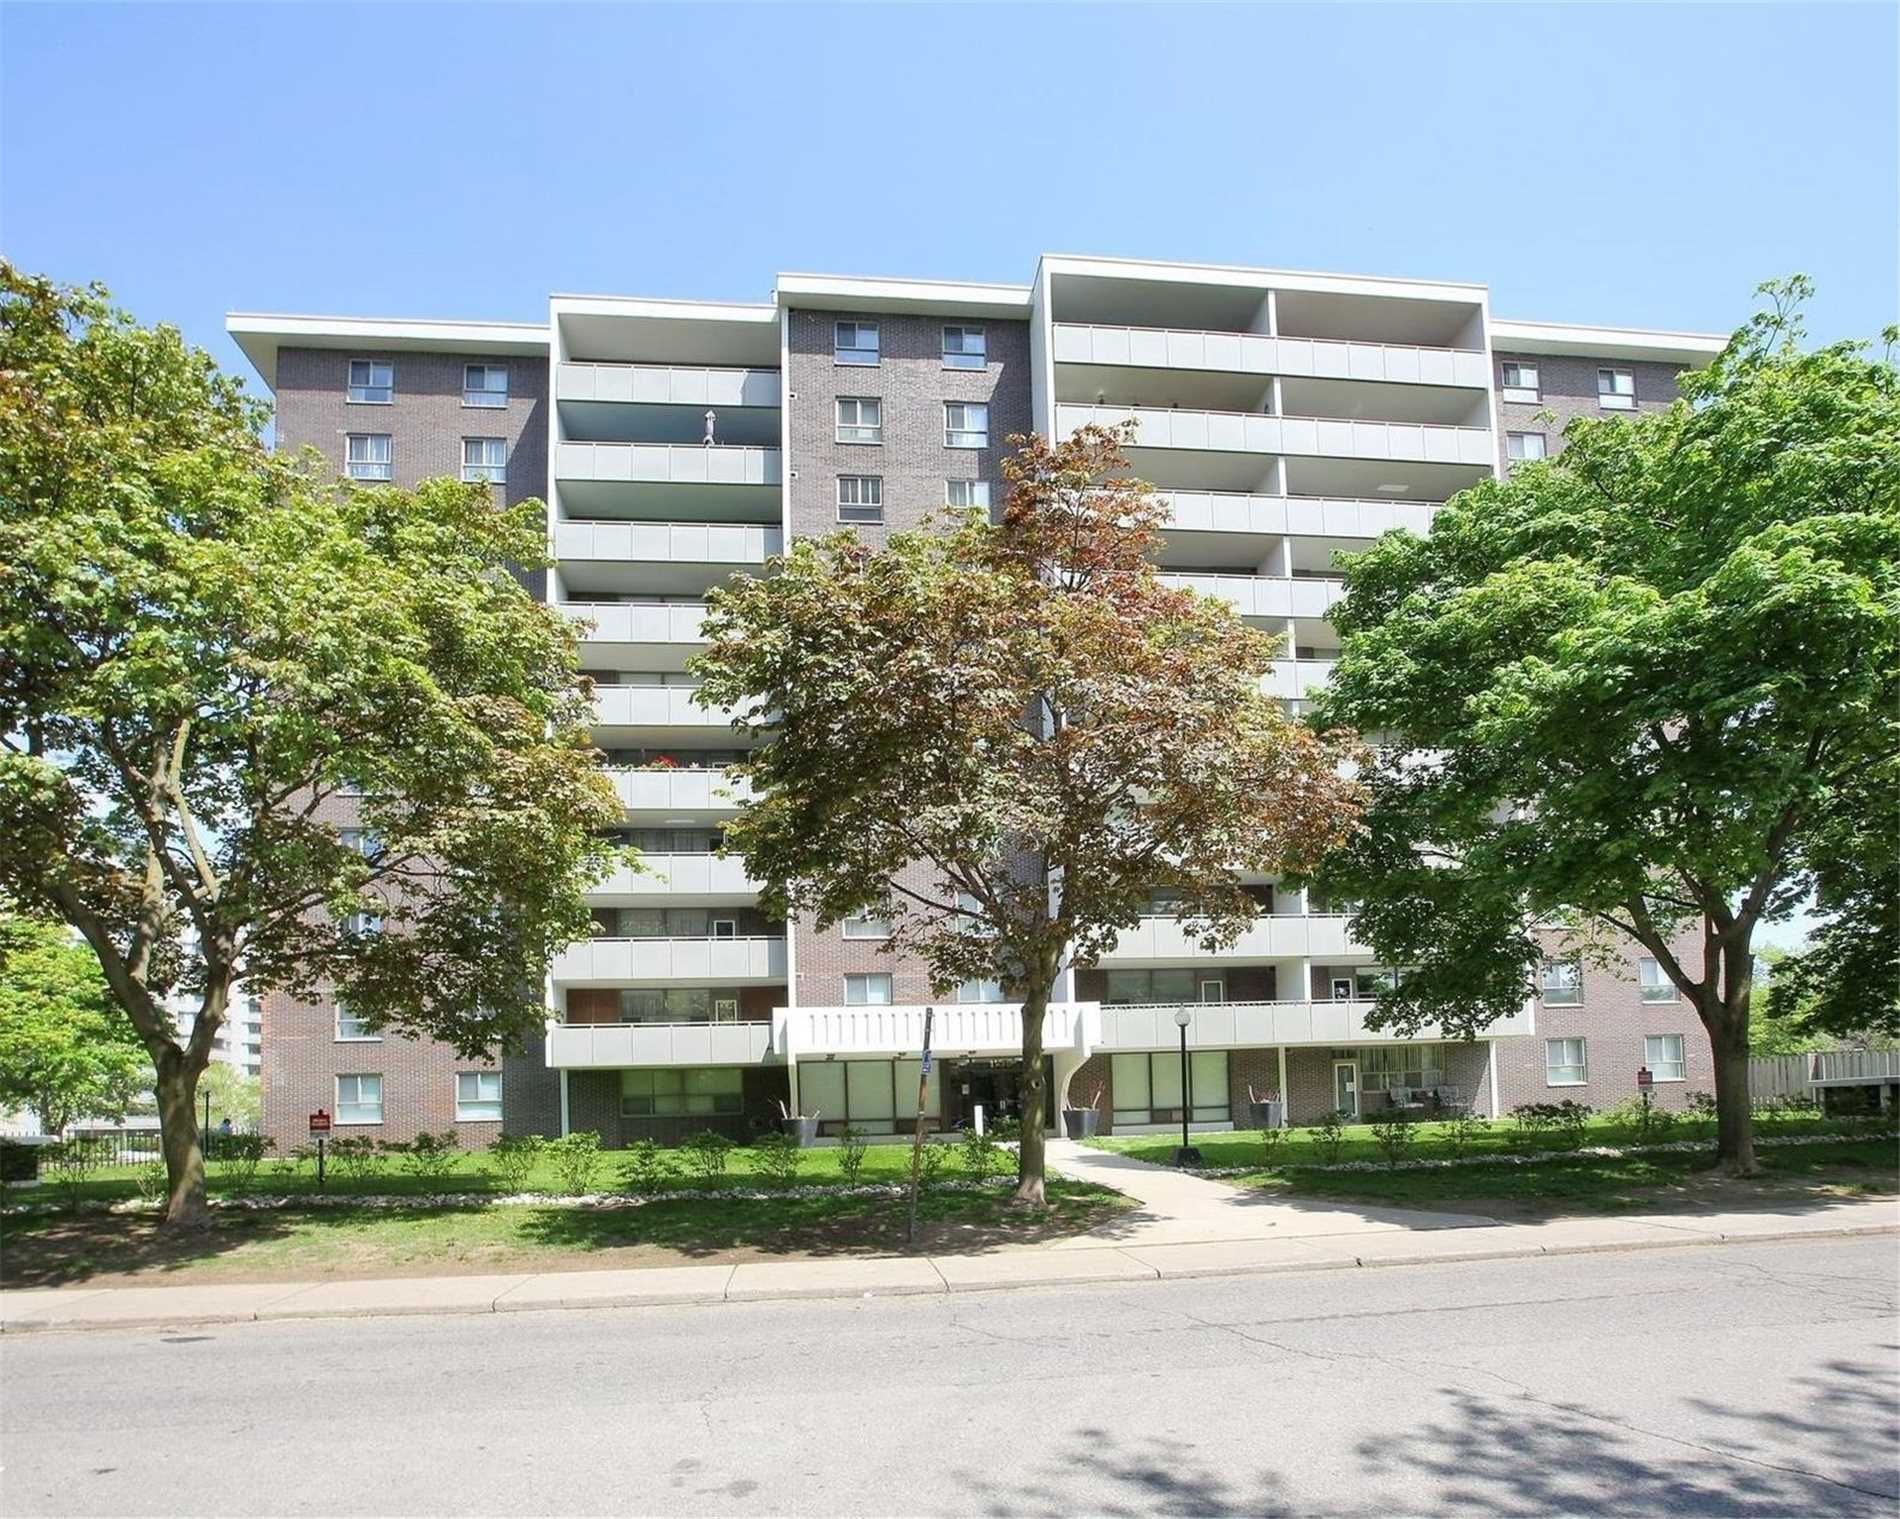 New property listed in Broadview North, Toronto E03